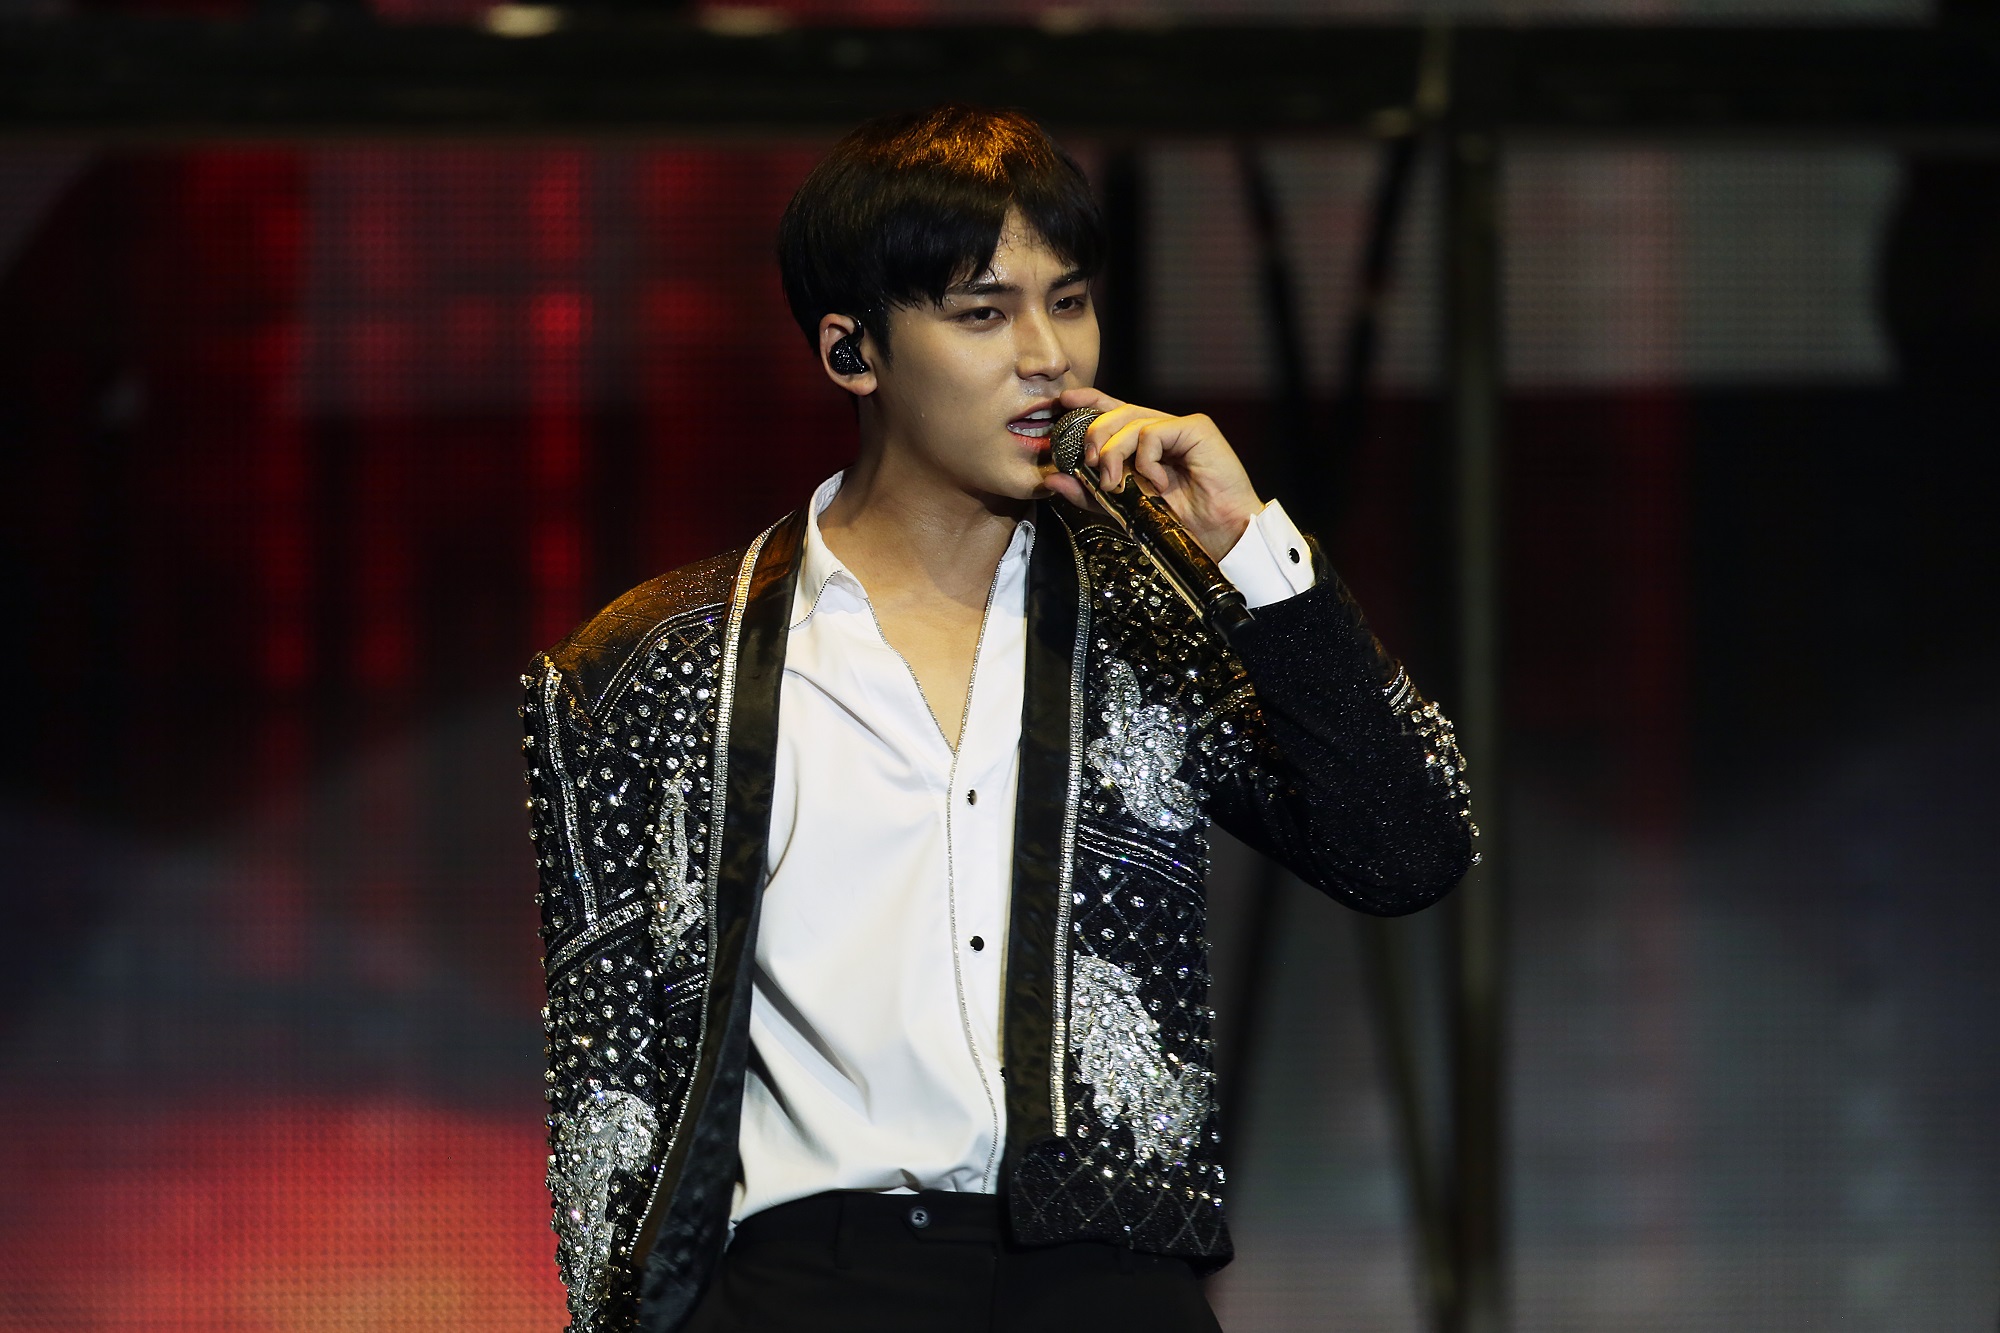 Mingyu of SEVENTEEN performing during the band's Ode to You tour in 2020